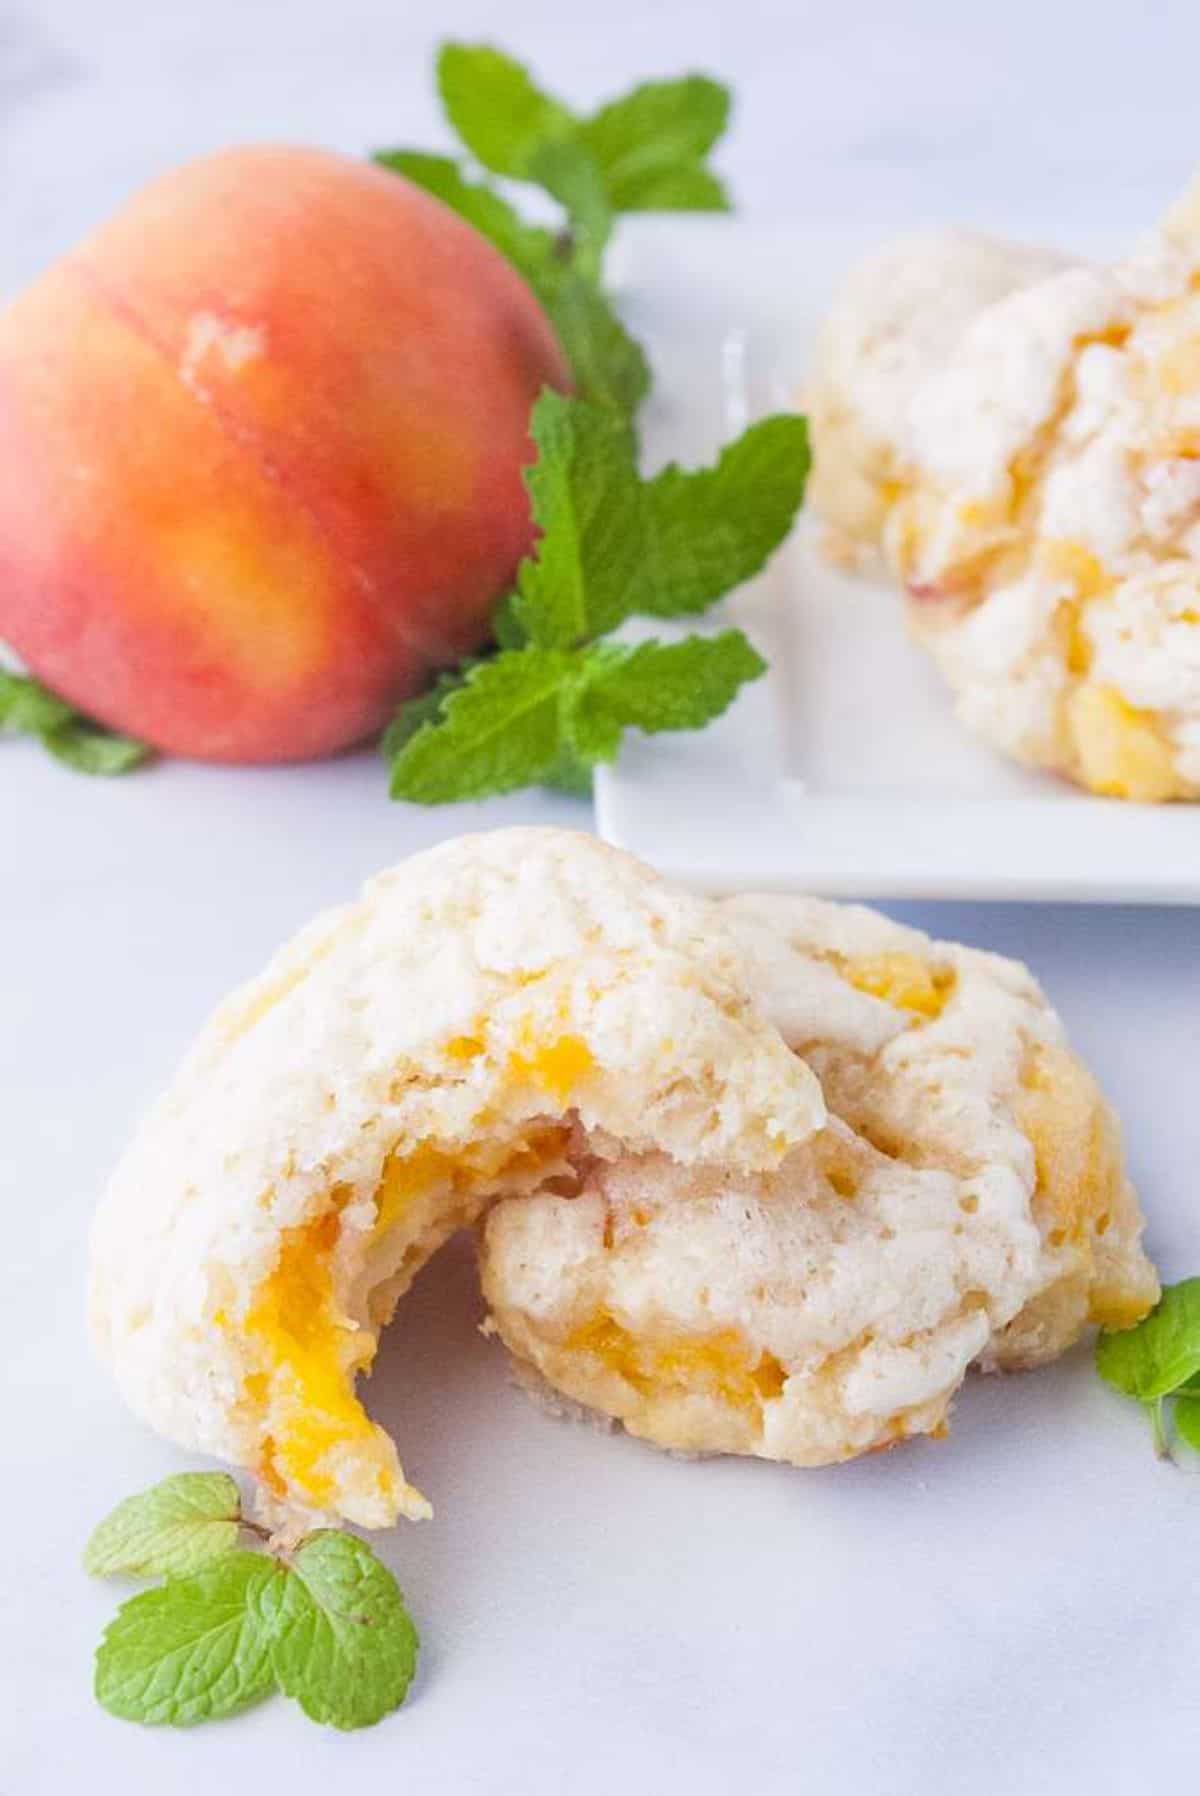 Peach Scones on a table with a ripe peach.